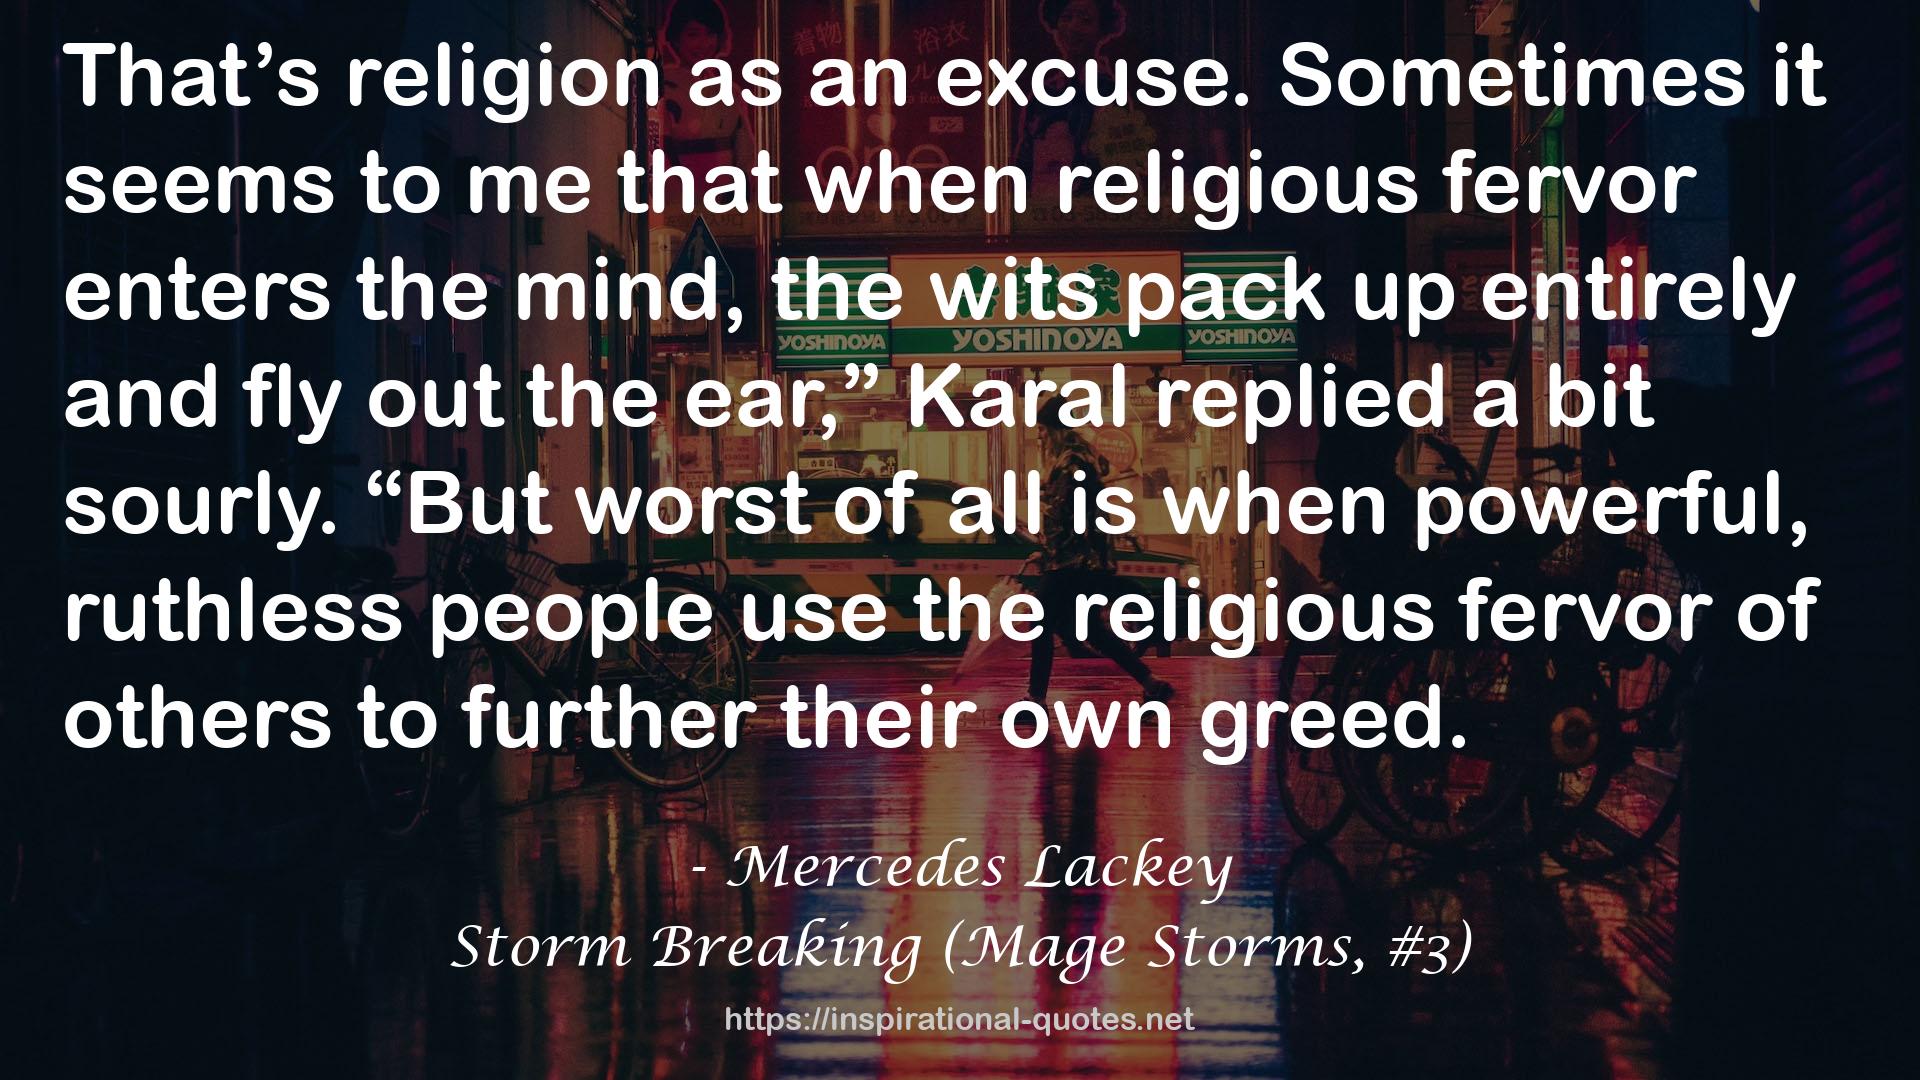 Storm Breaking (Mage Storms, #3) QUOTES